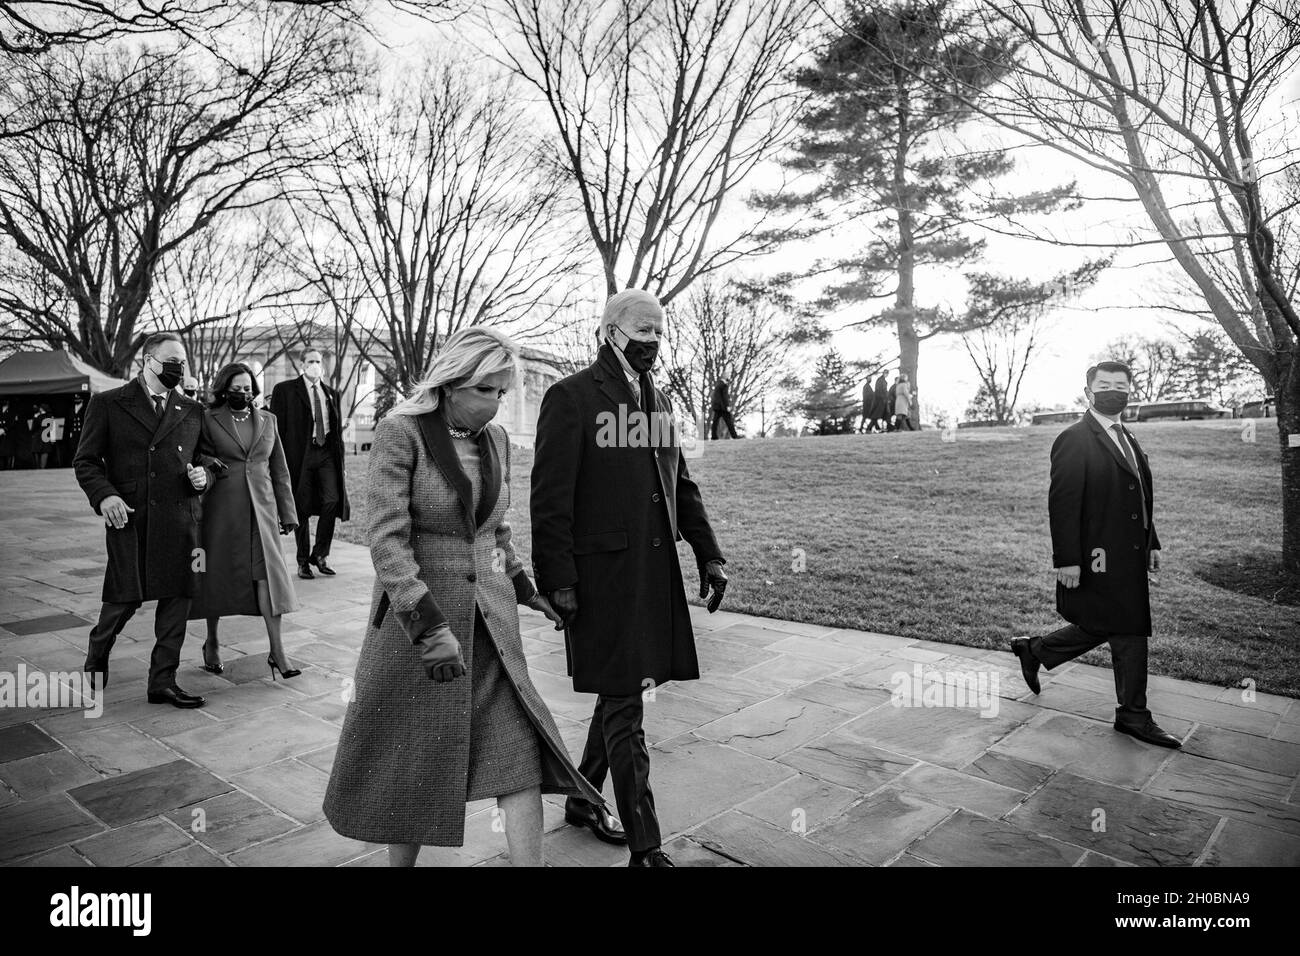 President Joseph R. Biden, Jr., First Lady Dr. Jill Biden, Vice President Kamala Harris, and Second Gentlemen Douglas Emhoff depart Arlington National Cemetery, January 20, 2020. Biden and Harris participated in a Presidential Armed Forces Full Honors Wreath-Laying Ceremony at the Tomb of the Unknown Soldier at Arlington National Cemetery. In attendance were former Presidents Barack H. Obama, George W. Bush, William J. Clinton, and former First Ladies Michelle Obama, Laura Bush, and former Secretary of State Hillary Clinton. The ceremony was hosted by U.S. Army Maj. Gen. Omar Jones IV, command Stock Photo